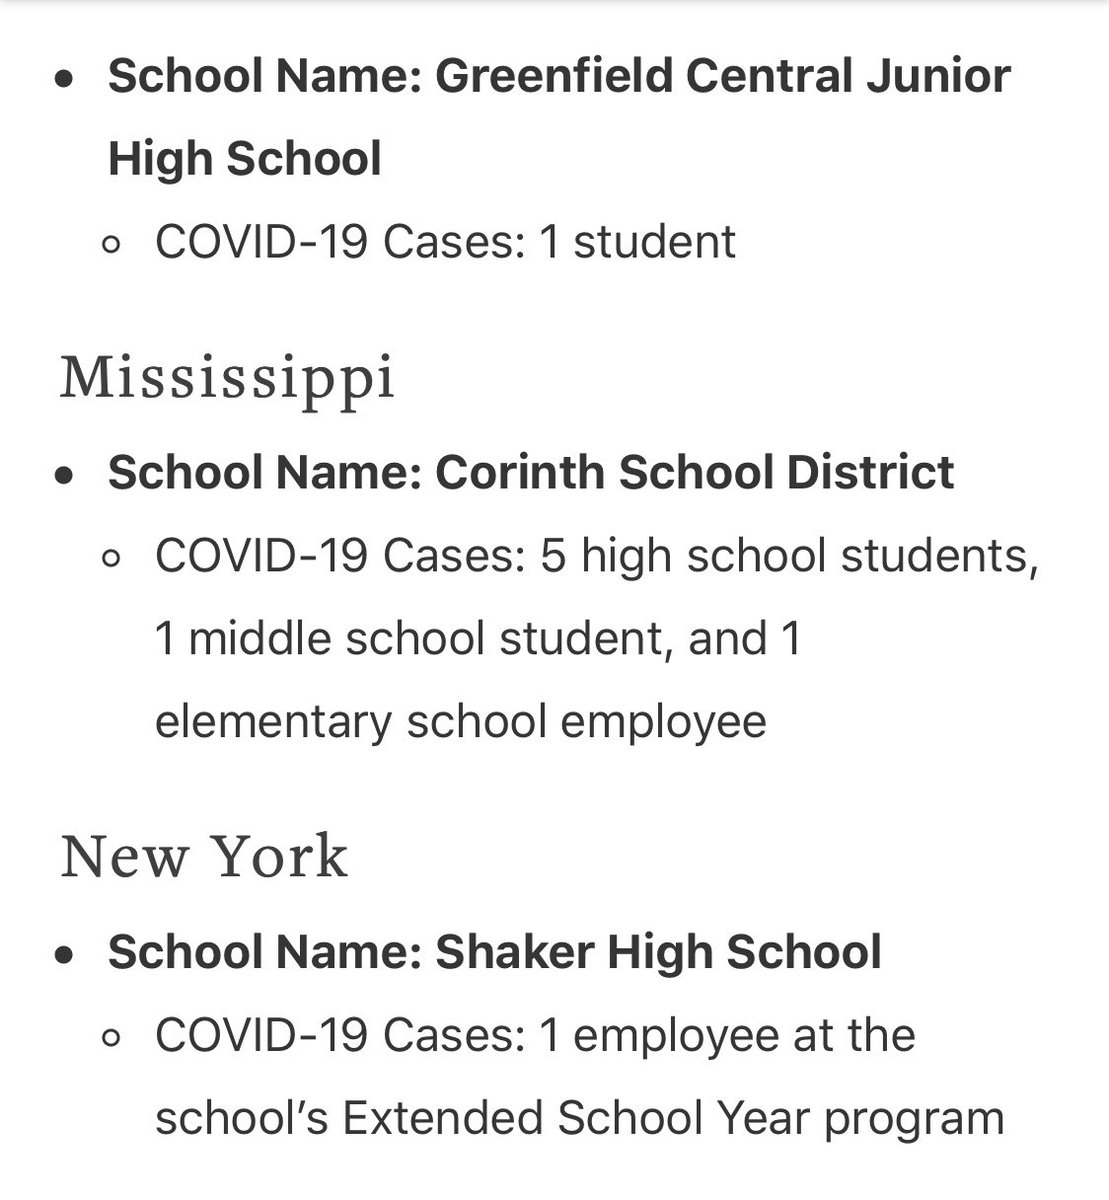 All These Schools Reopened and Then Had COVID-19 Outbreaks | via  @FatherlyHQ  https://www.fatherly.com/parenting/all-these-schools-reopened-and-then-had-covid-19-outbreaks/